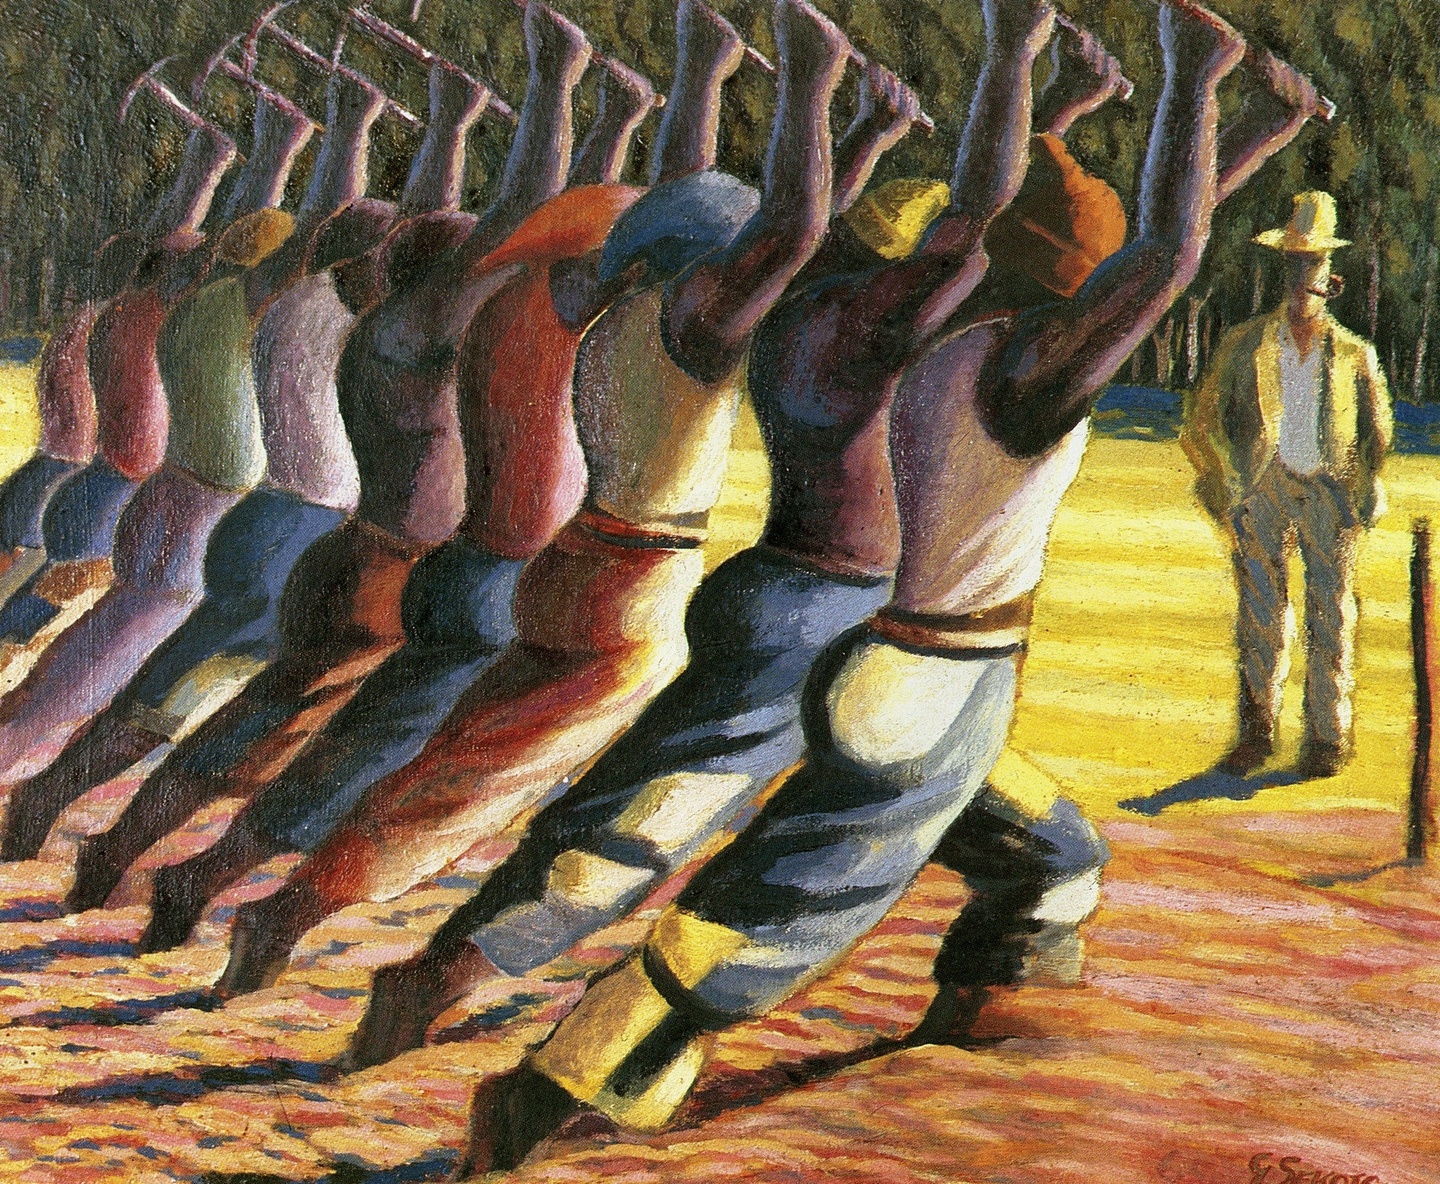 A painting depicting a diagonal row of workers with picks raised and a figure observing them to the right